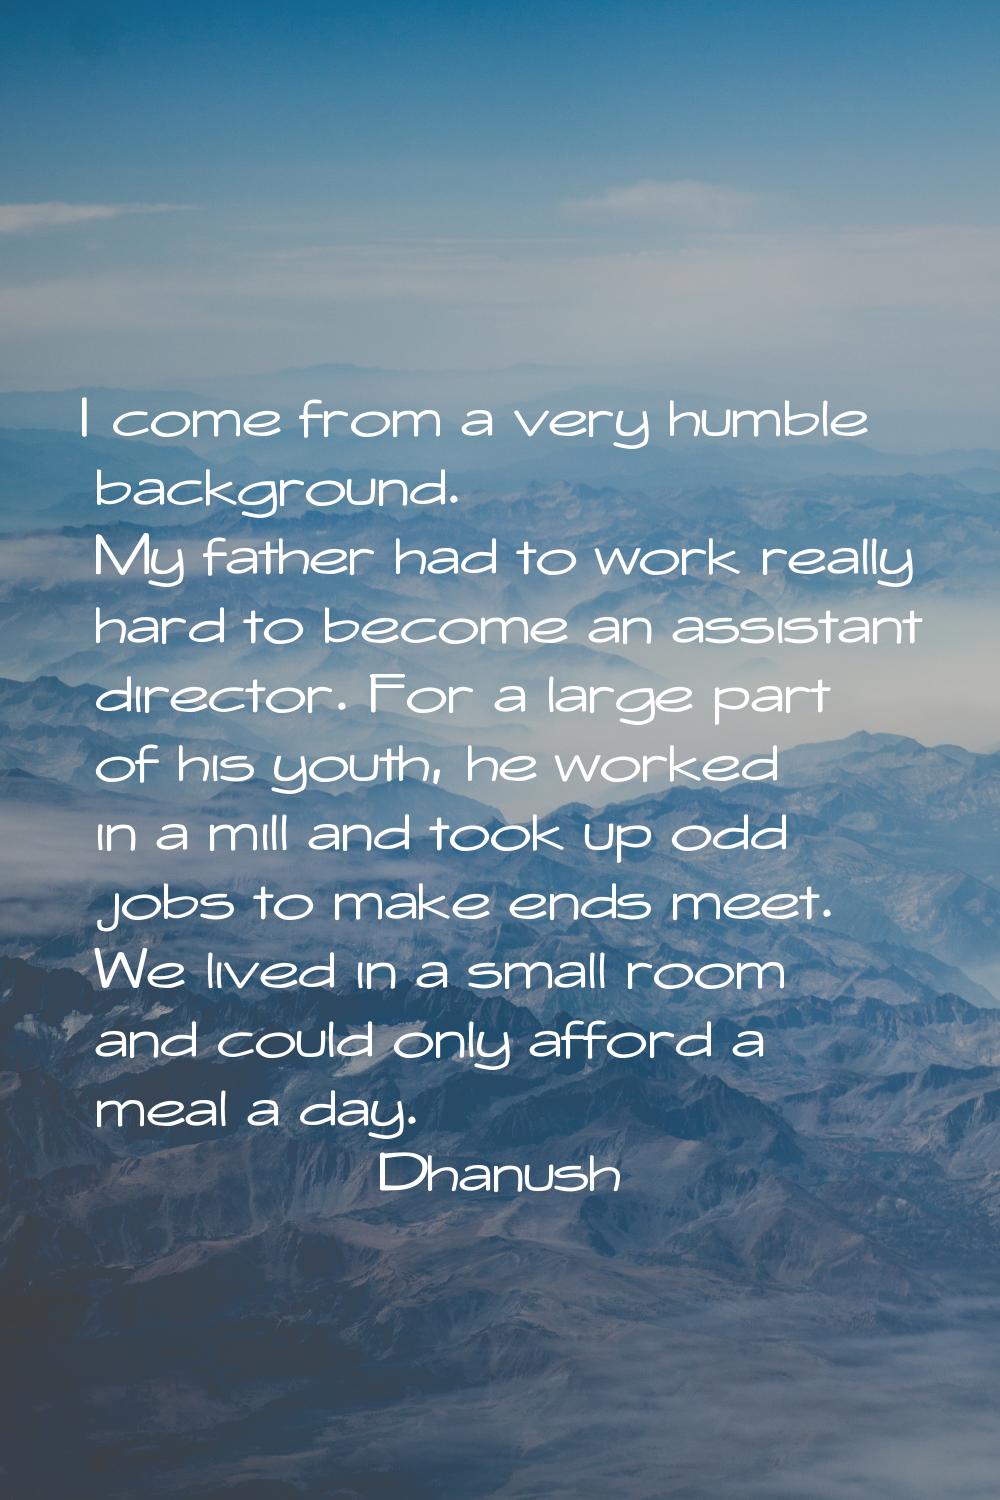 I come from a very humble background. My father had to work really hard to become an assistant dire